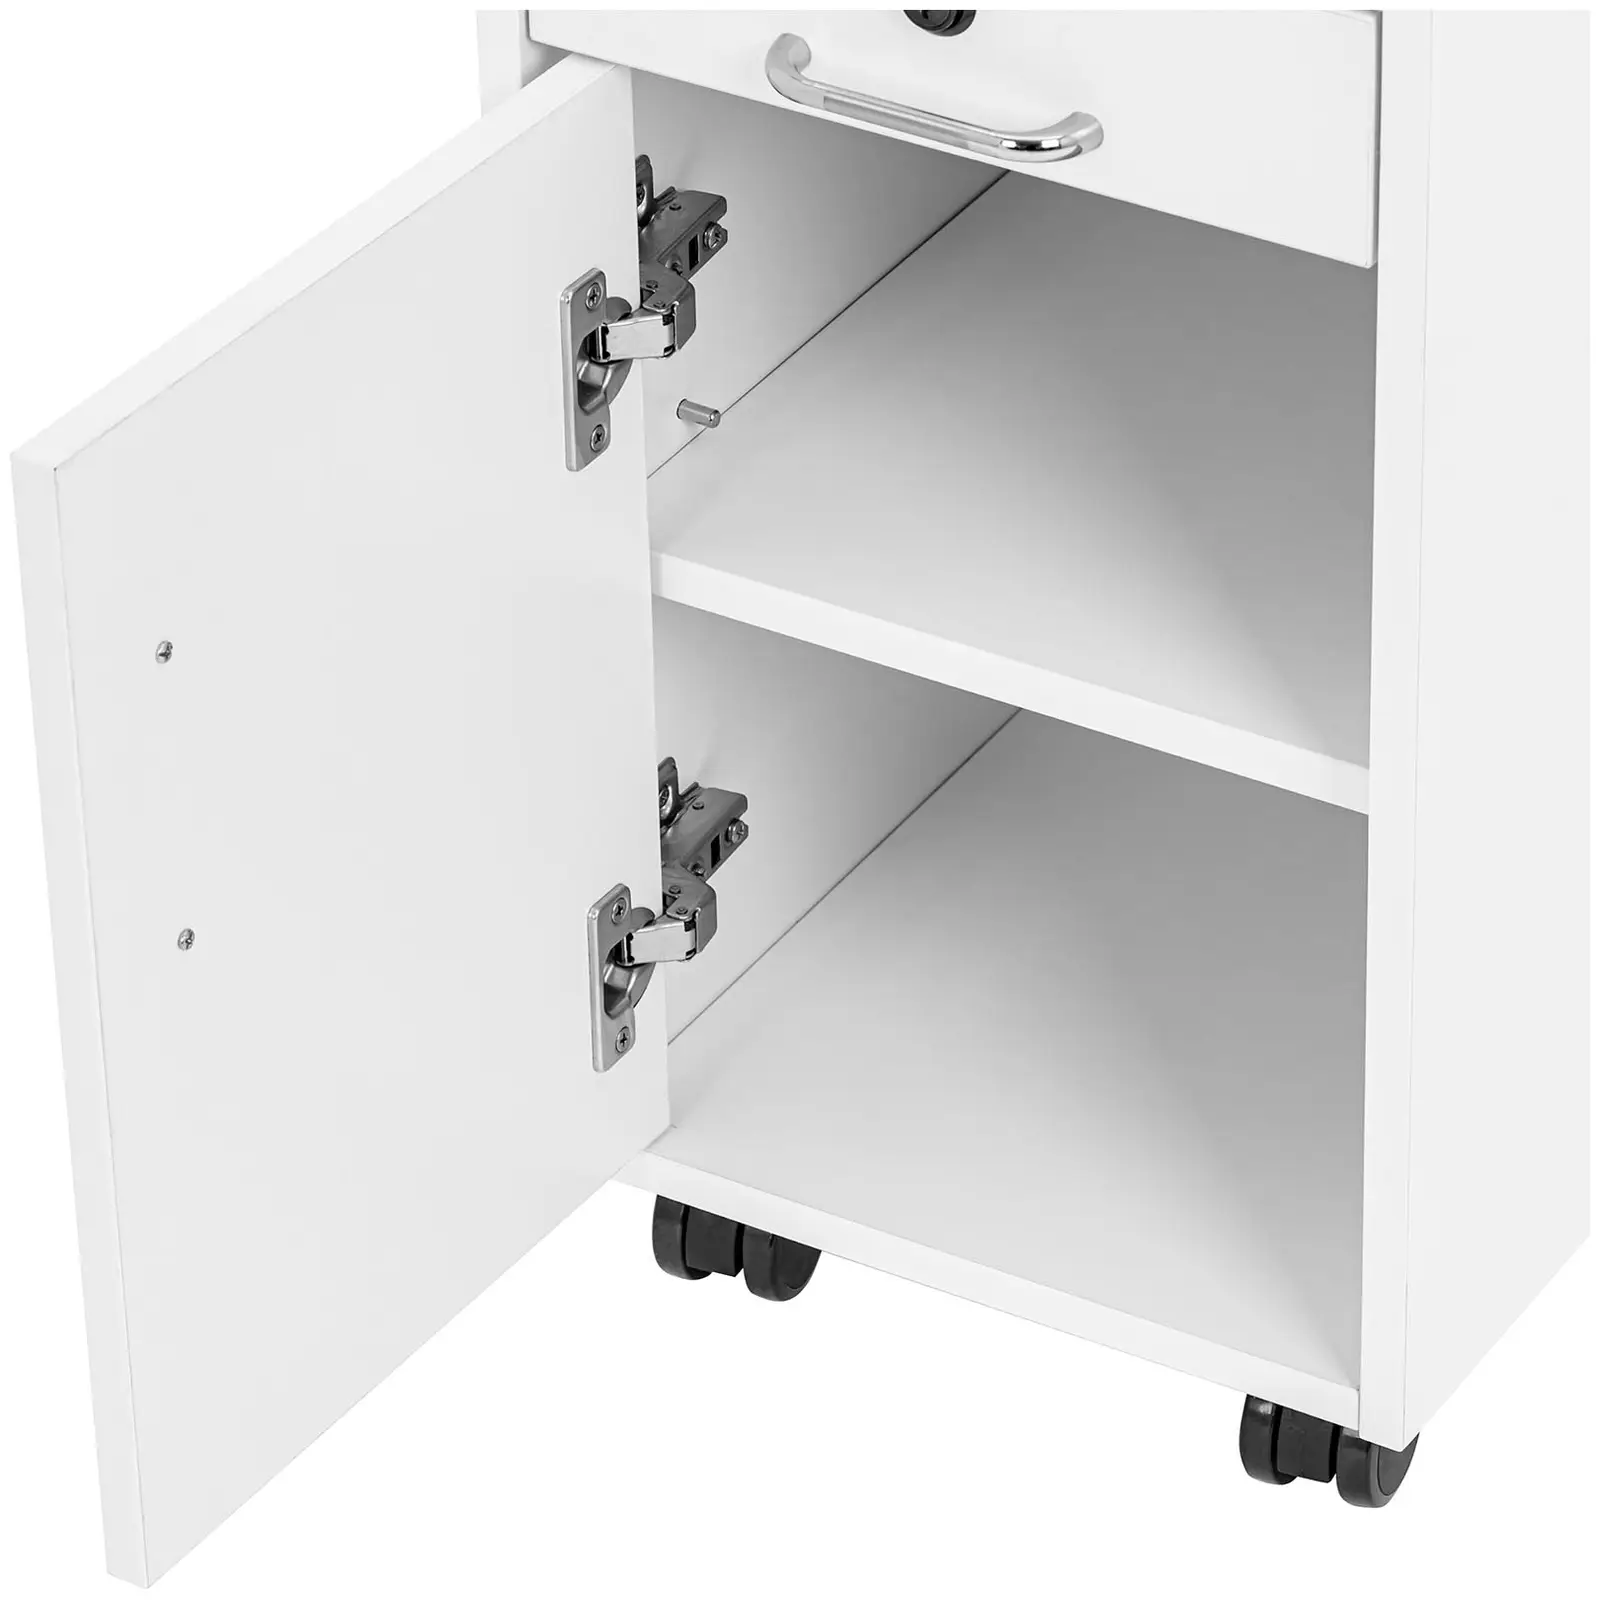 Beauty Cabinet - 82 x 43 x 31 cm - 1 drawers - 1 compartment - 1 side shelf